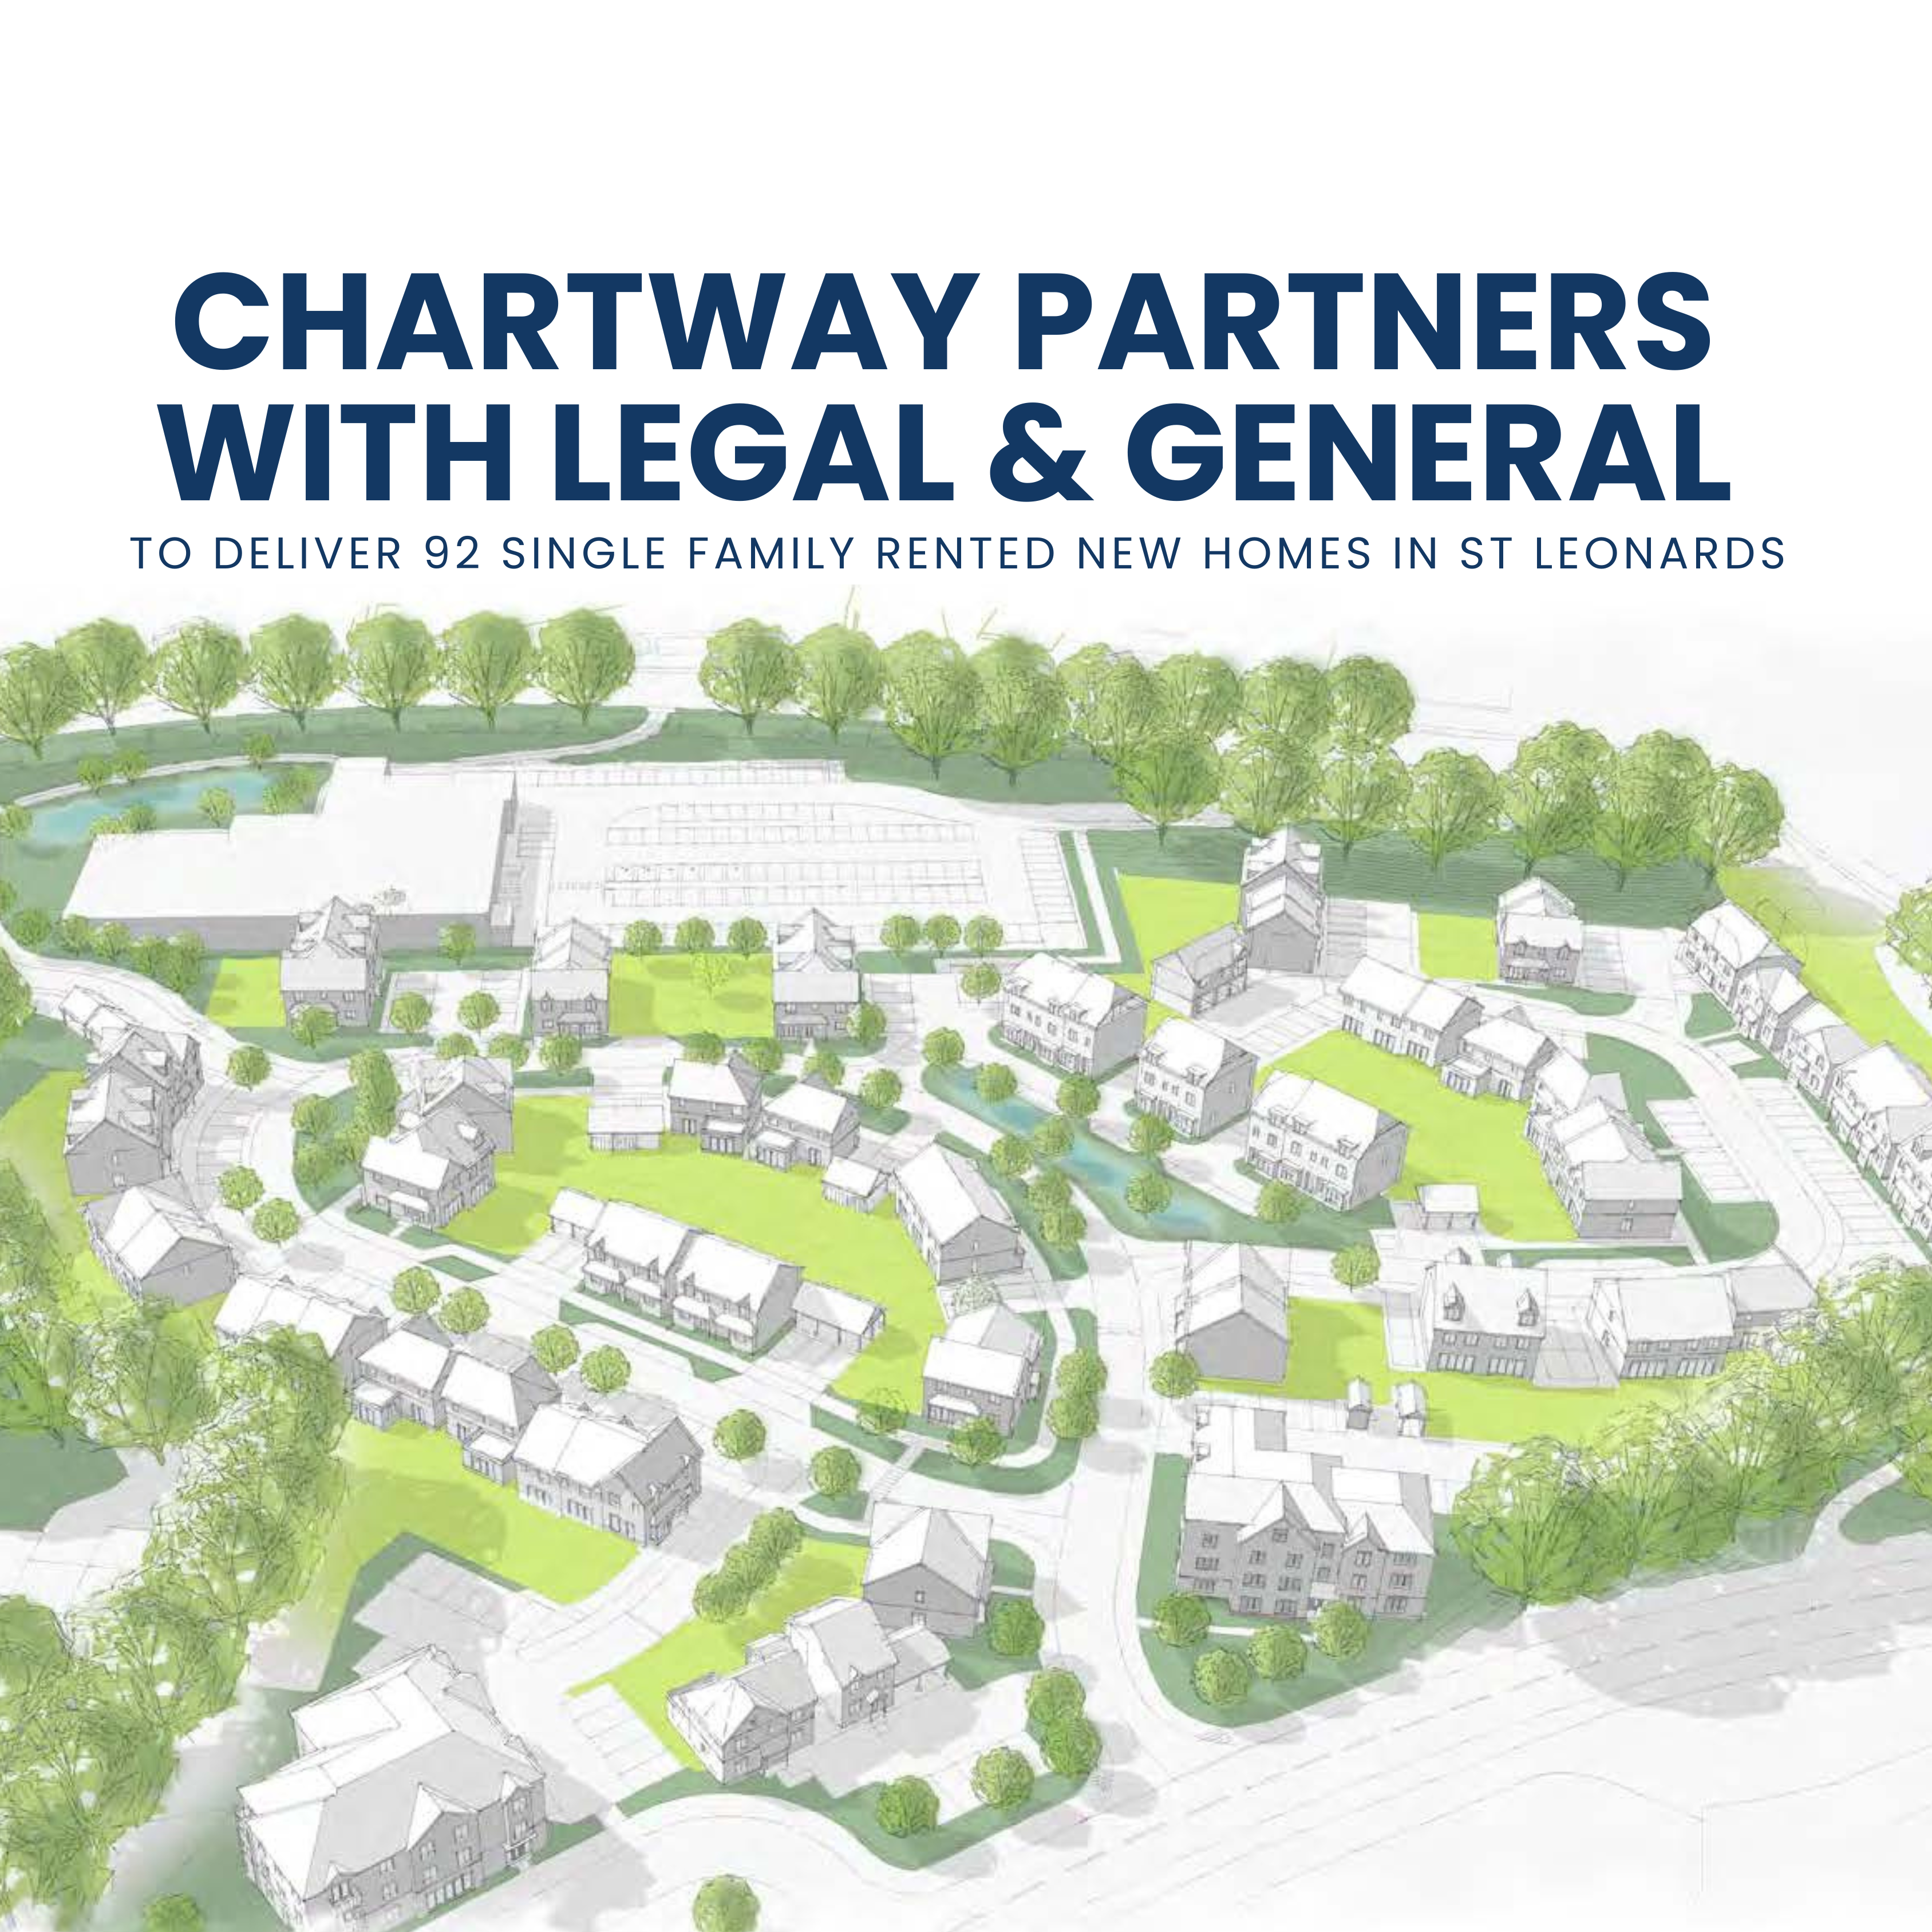 Chartway partners with Legal & General to deliver 92 SFR homes in Hastings